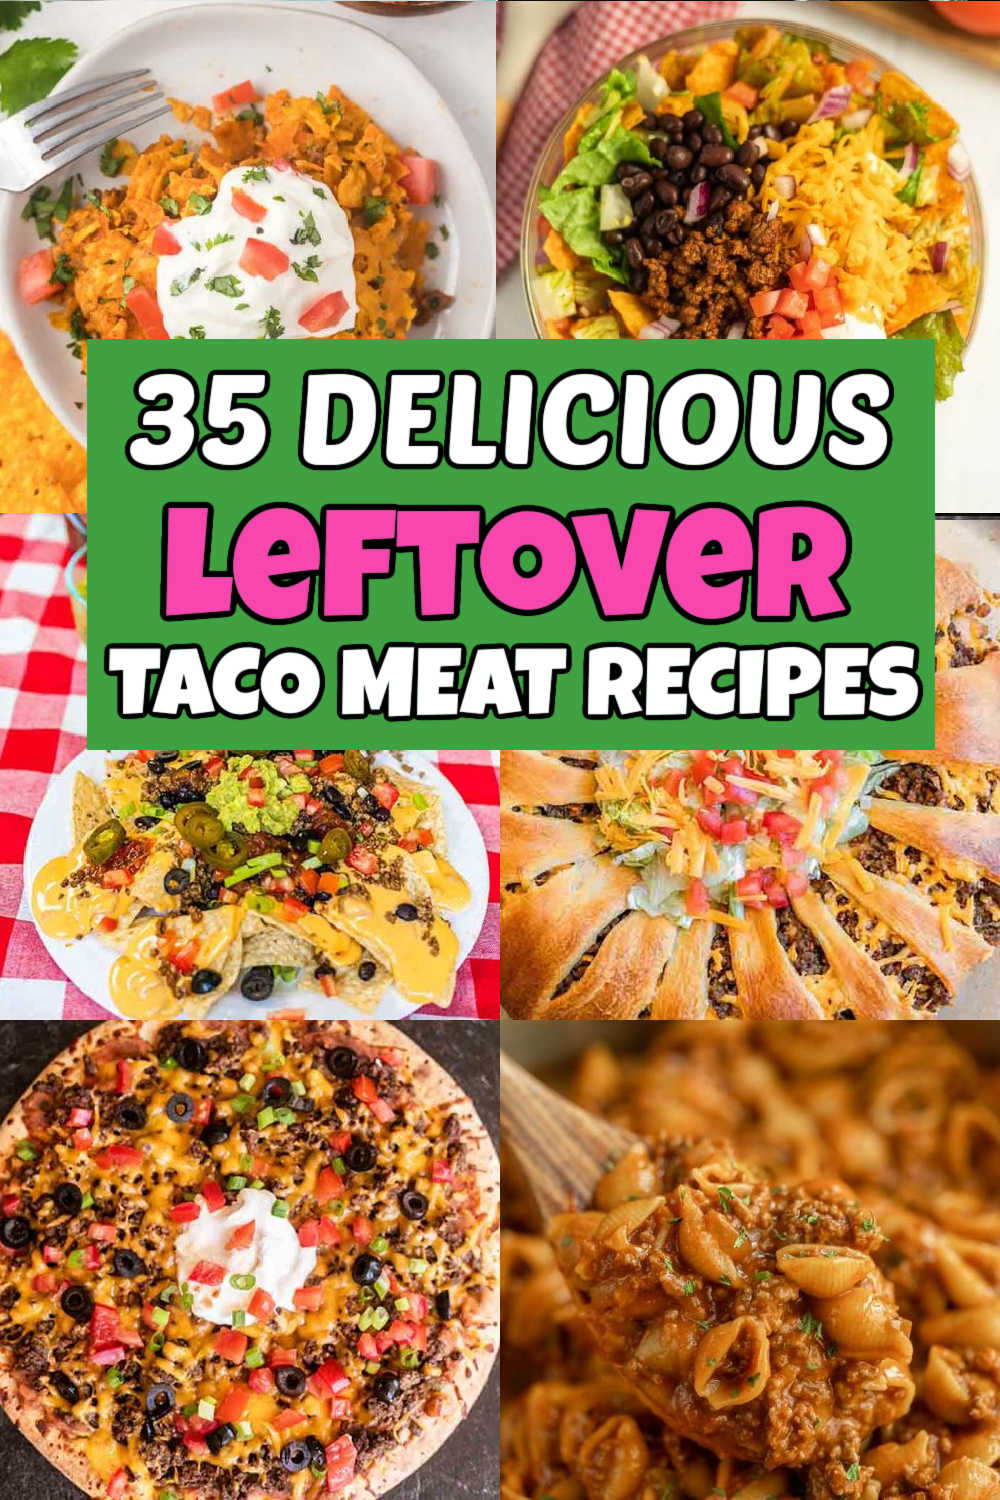 Discover how to make the most of your leftovers with 35 delectable Leftover Taco Meat Recipes. Discover the art of utilizing remaining taco meat. From stuffed peppers to overloaded nachos, there